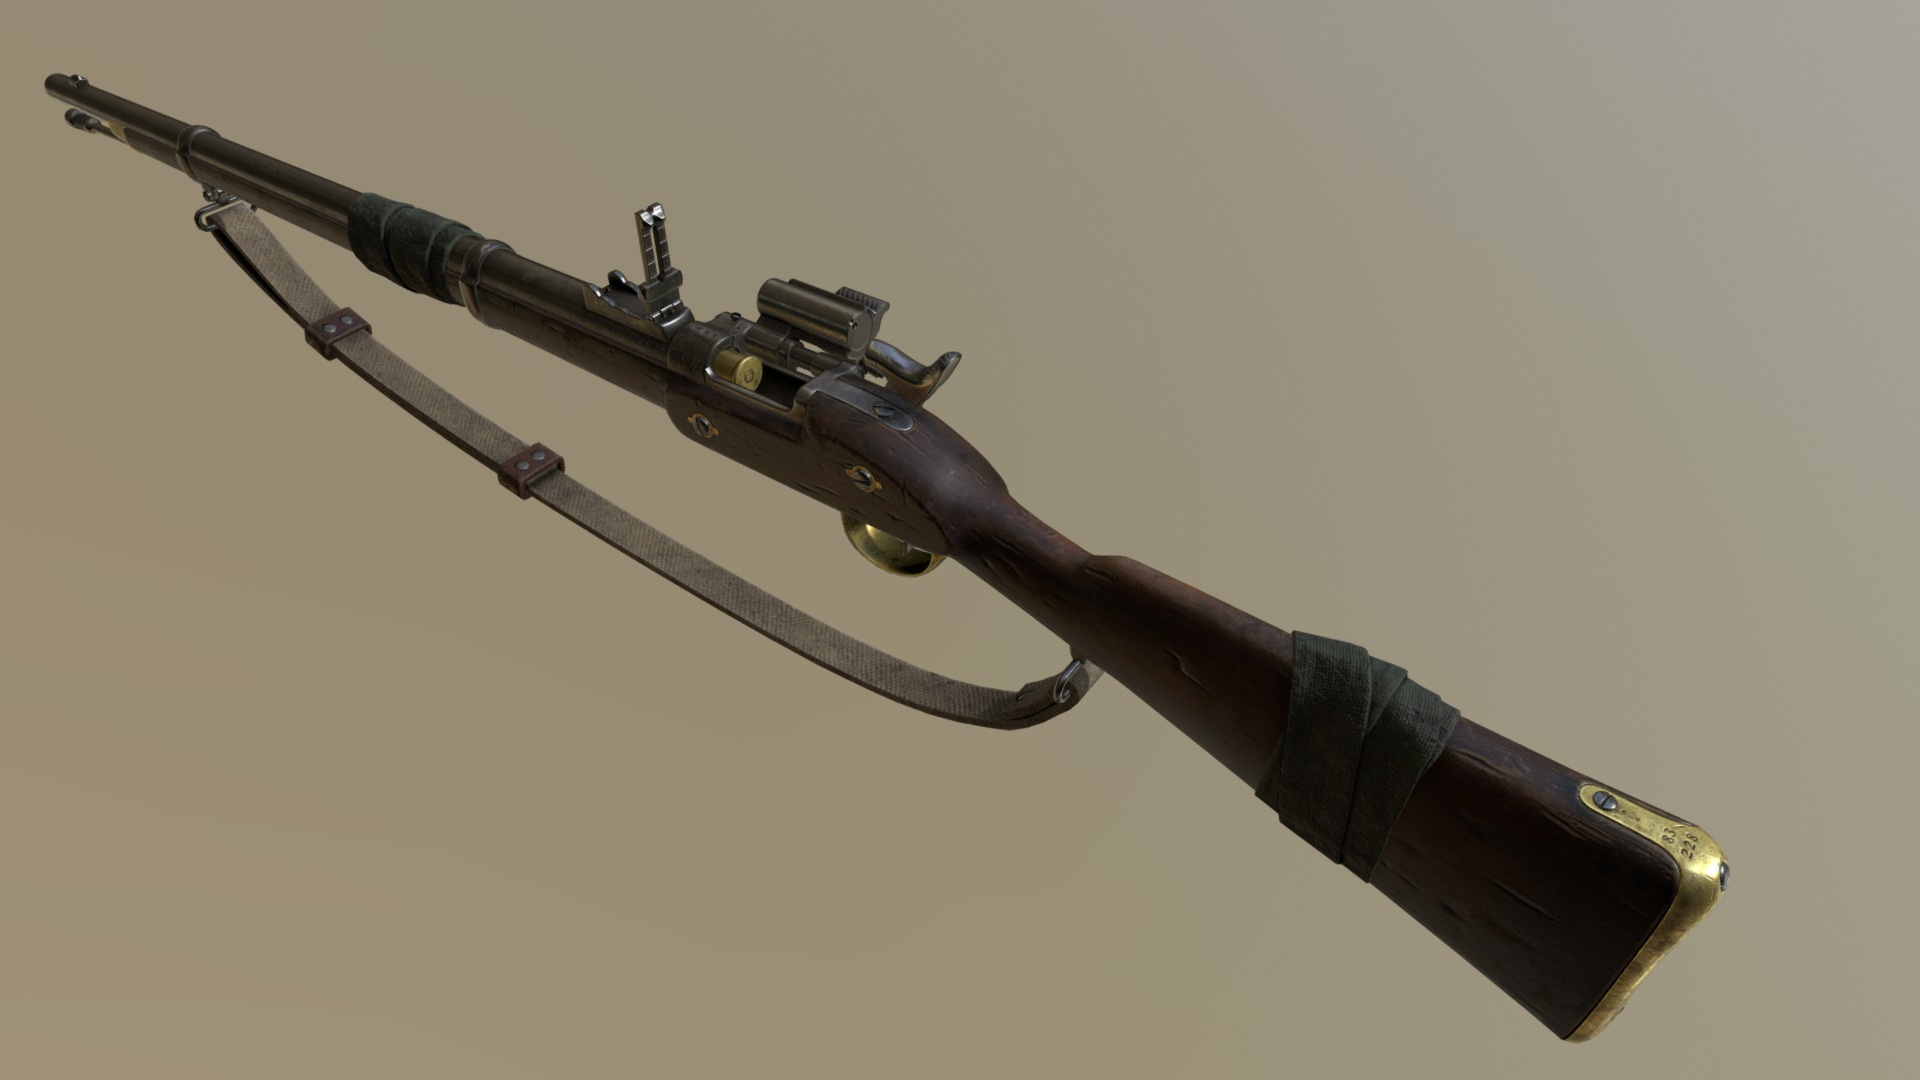 At the height of the bushranging era, this rifle was already antiquated, however with a breech loaded .577 round it made it no less deadly.

Adopted by the British Empire in 1866 as a modern conversion to their earlier muzzle loaded rifles. Part of Upsurge Studios first original title.

12224 Triangles and 1 x 4 k texture set 3d model